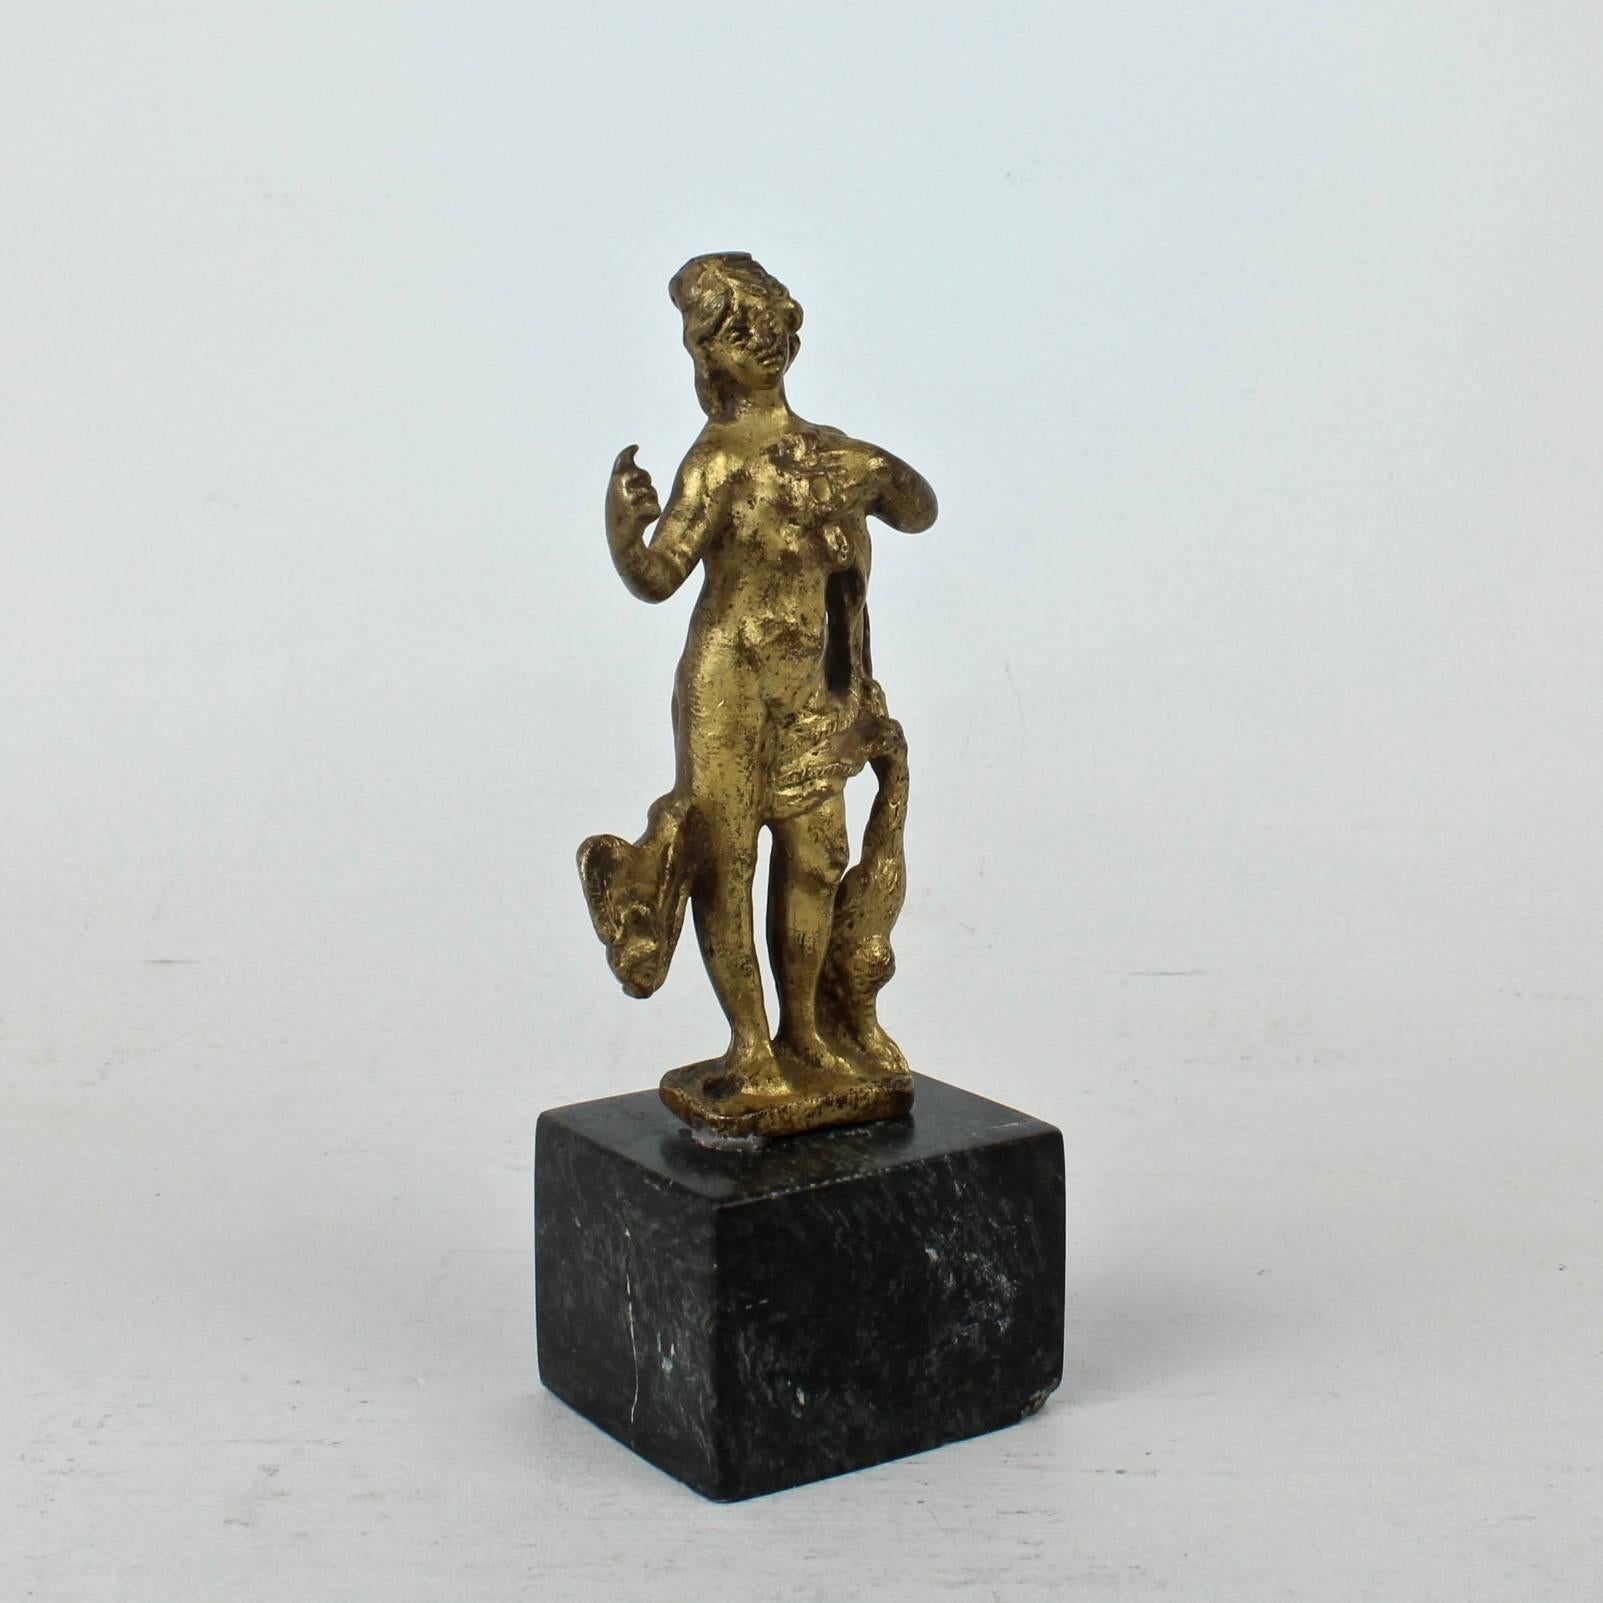 An early gilt bronze statuette. These were often used as a furniture mounts. It is likely Venetian and dates to the 17th century. 

It depicts the Roman Godess Juno semi-clad in drapework with her right hand extended raised and attended by a